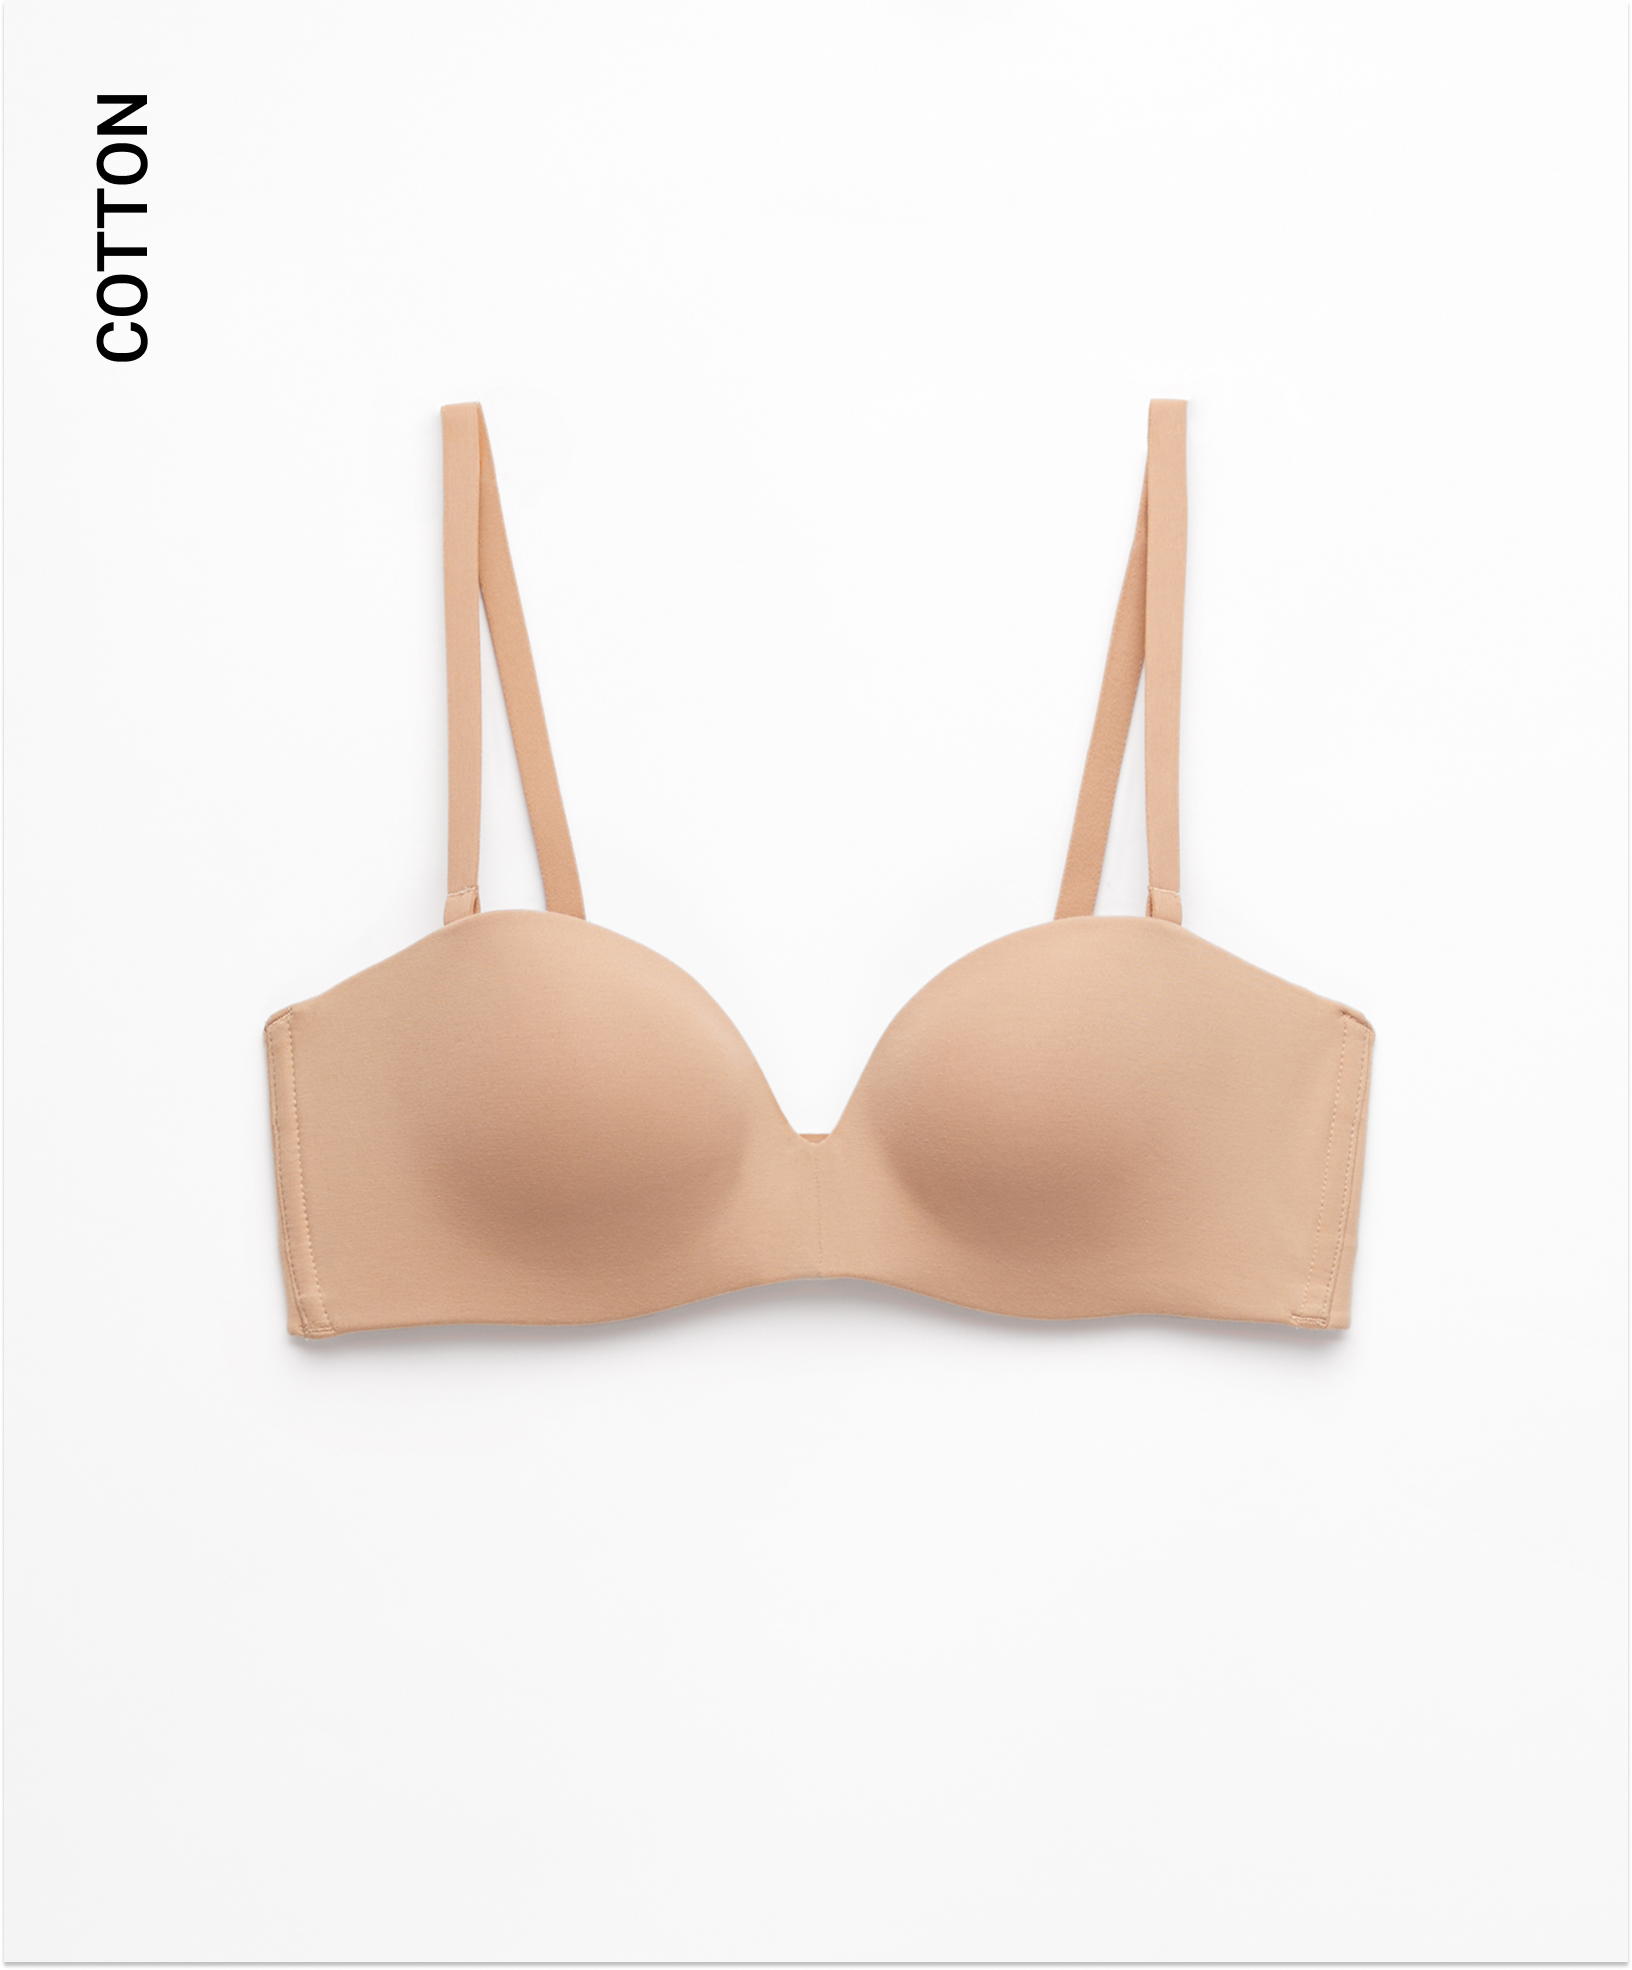 Cotton bra with removable straps